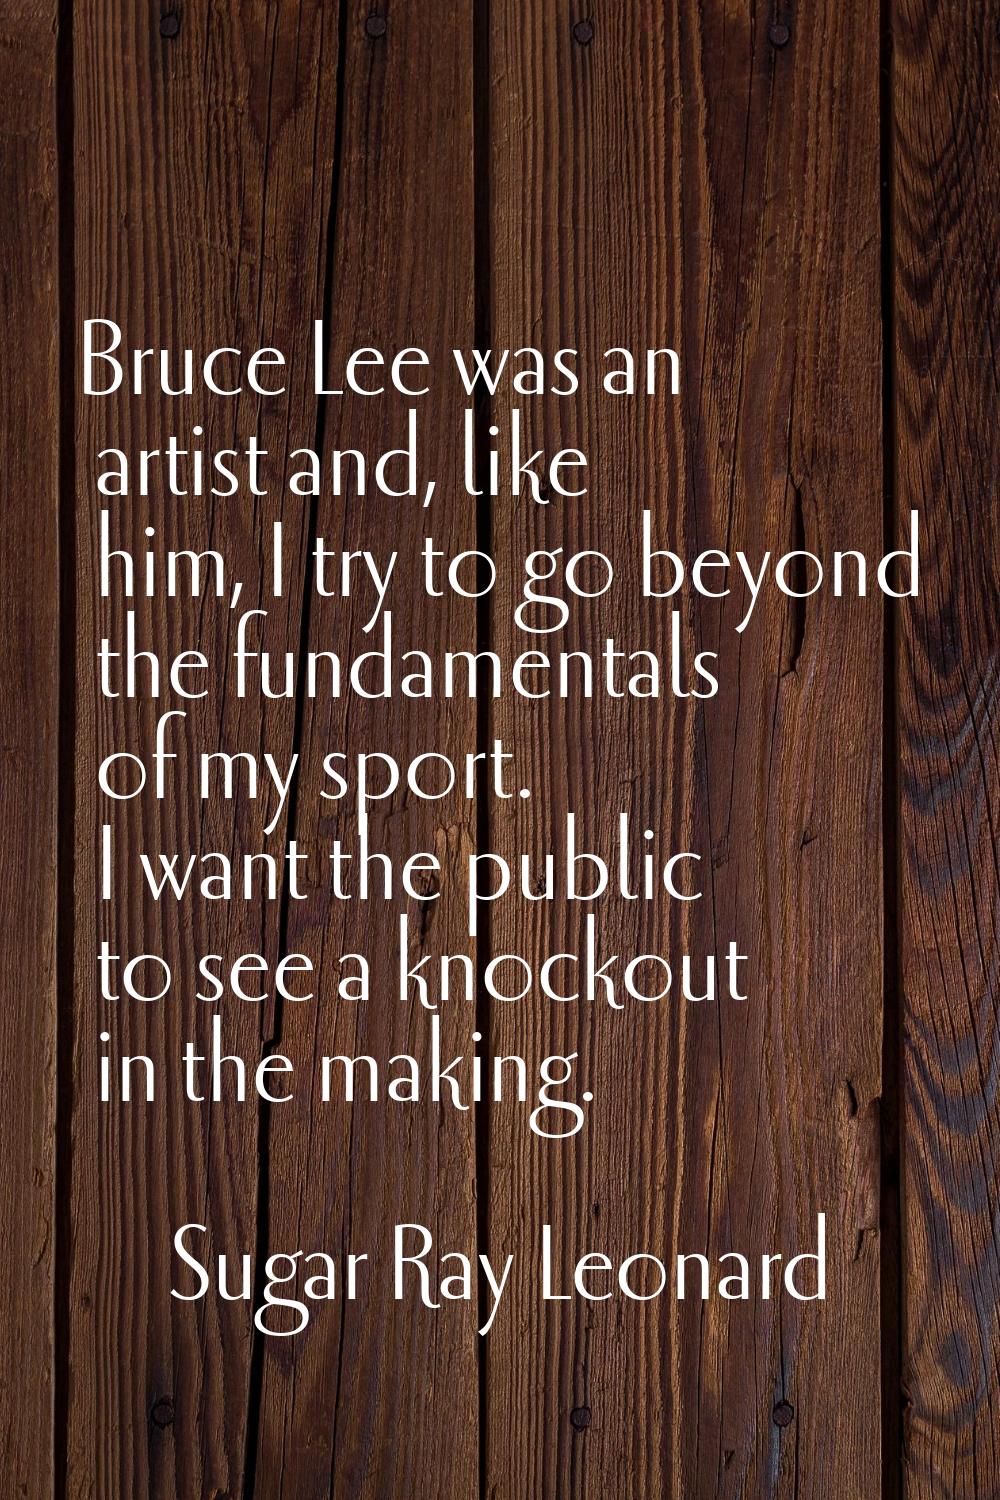 Bruce Lee was an artist and, like him, I try to go beyond the fundamentals of my sport. I want the 